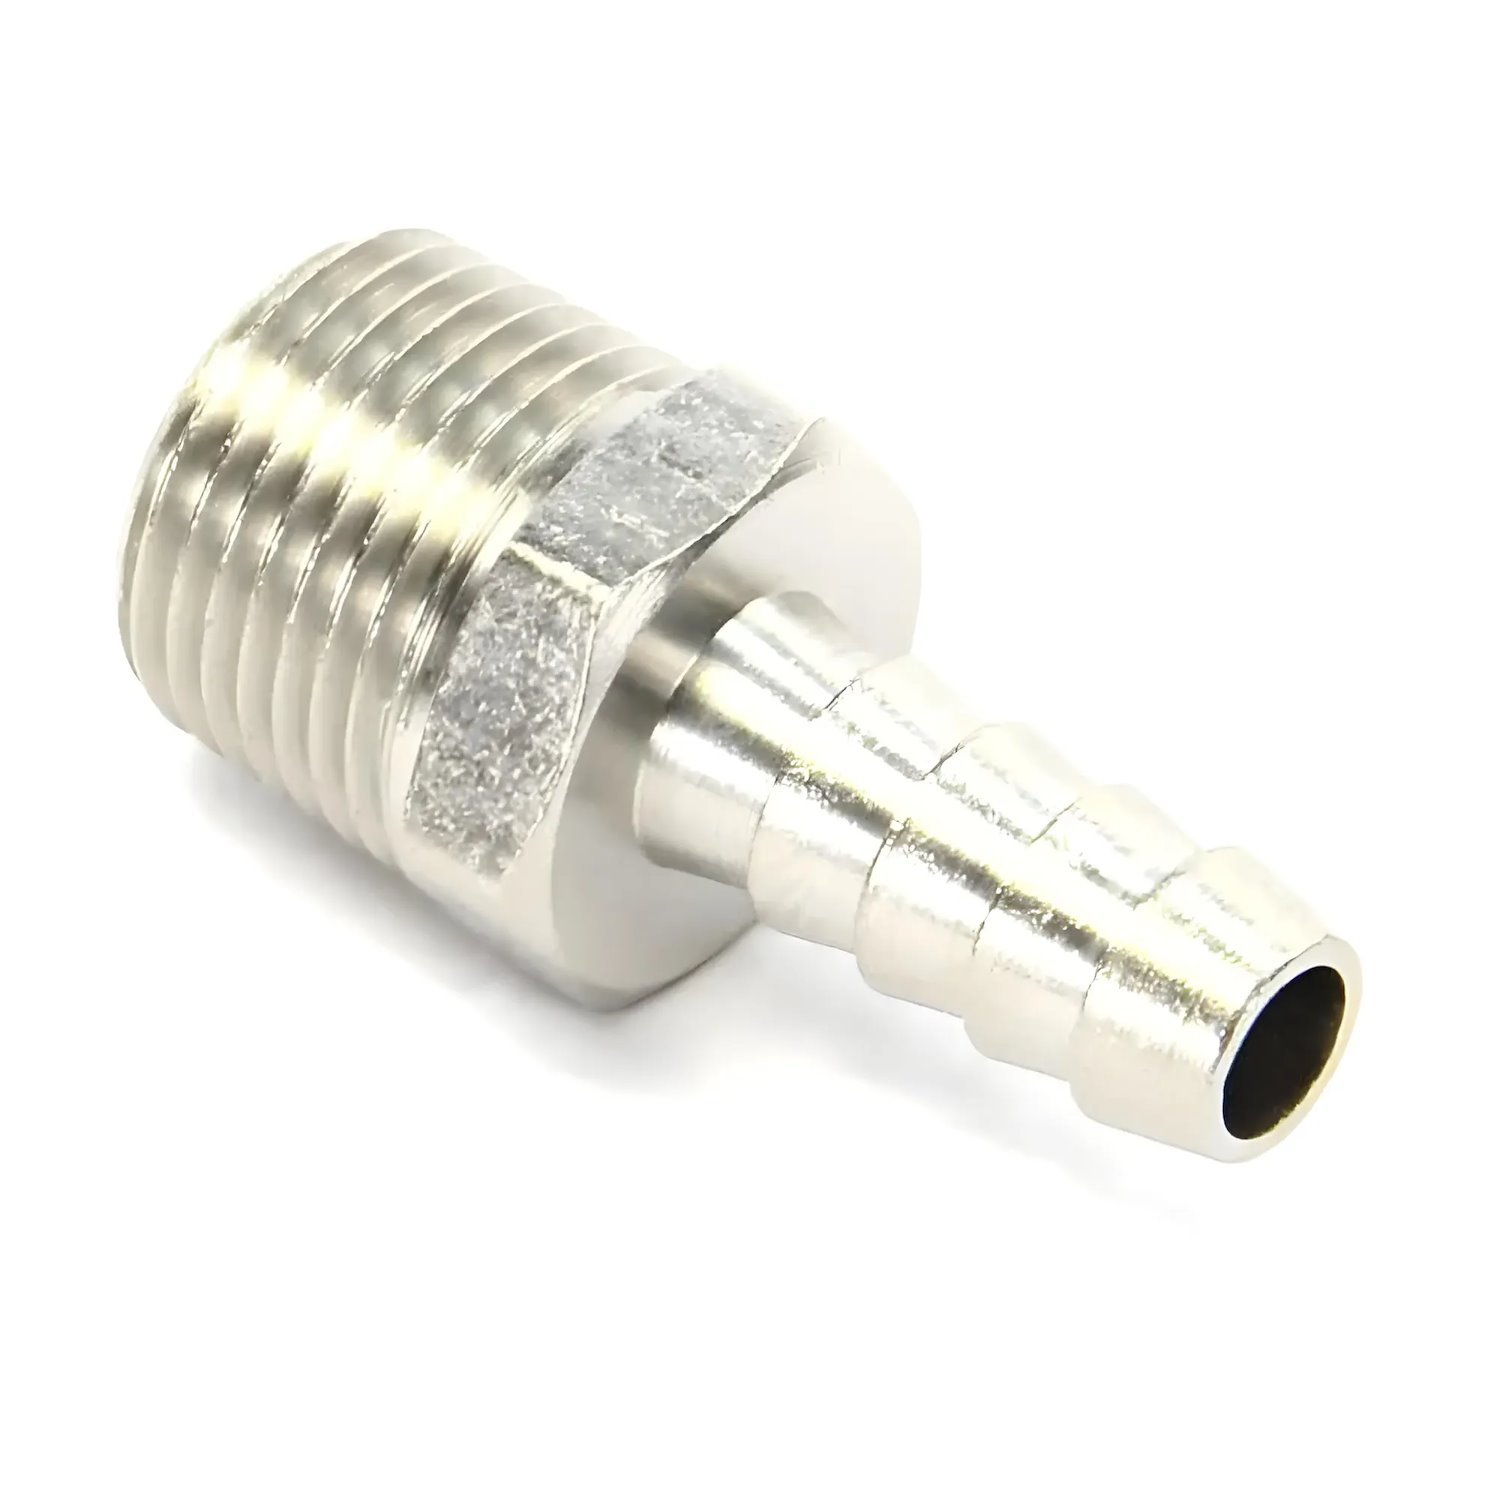 00-01923-B 3/8 in. NPT x 5/16 in. Straight Hose Barb Fitting, Male/Male